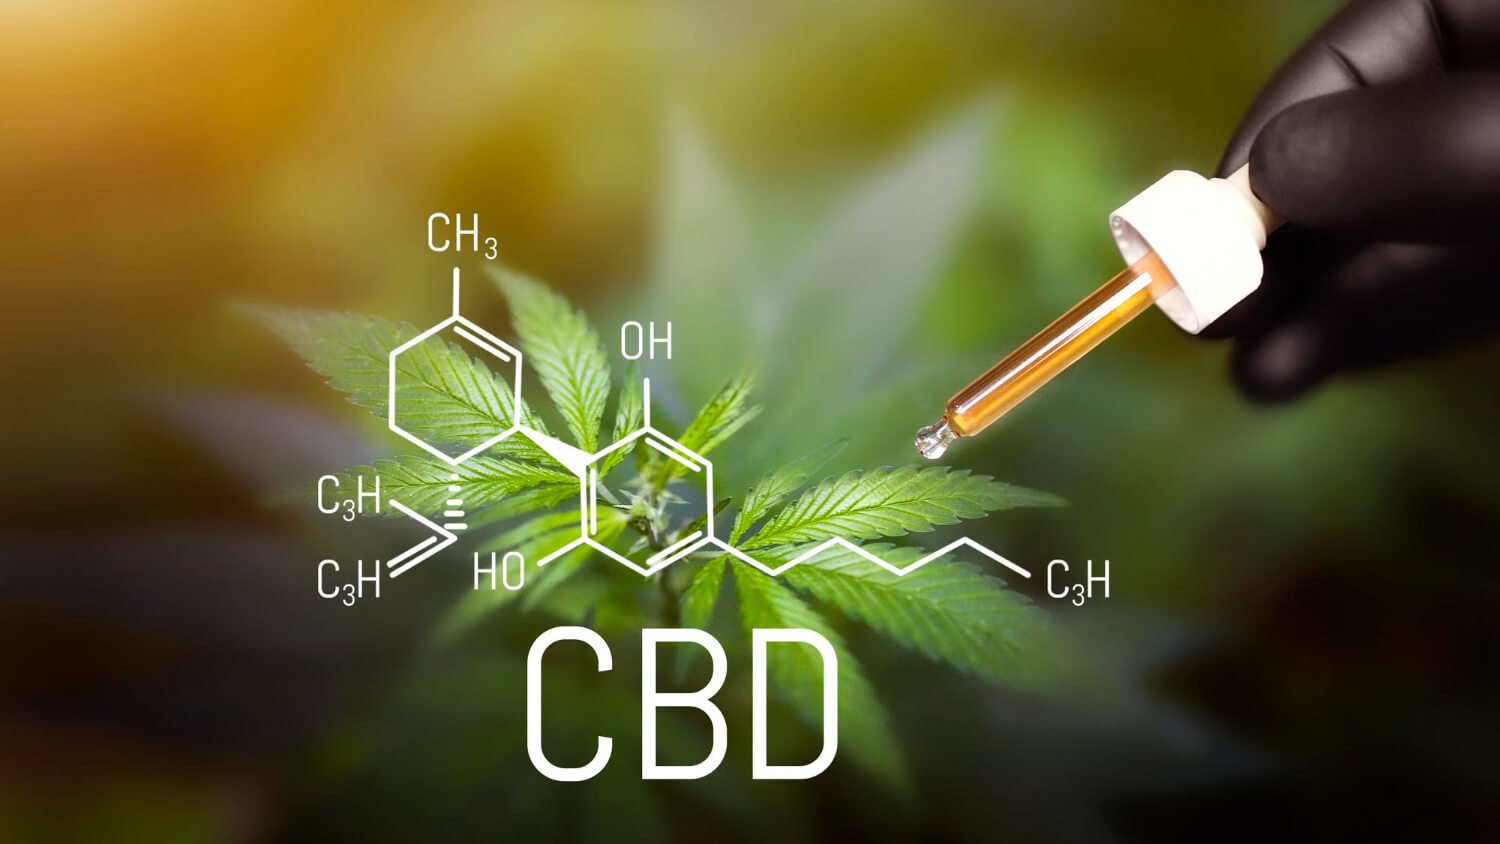 ONE HEMP coalition presented a study to U.S. officials advocating for CBD consumption limits